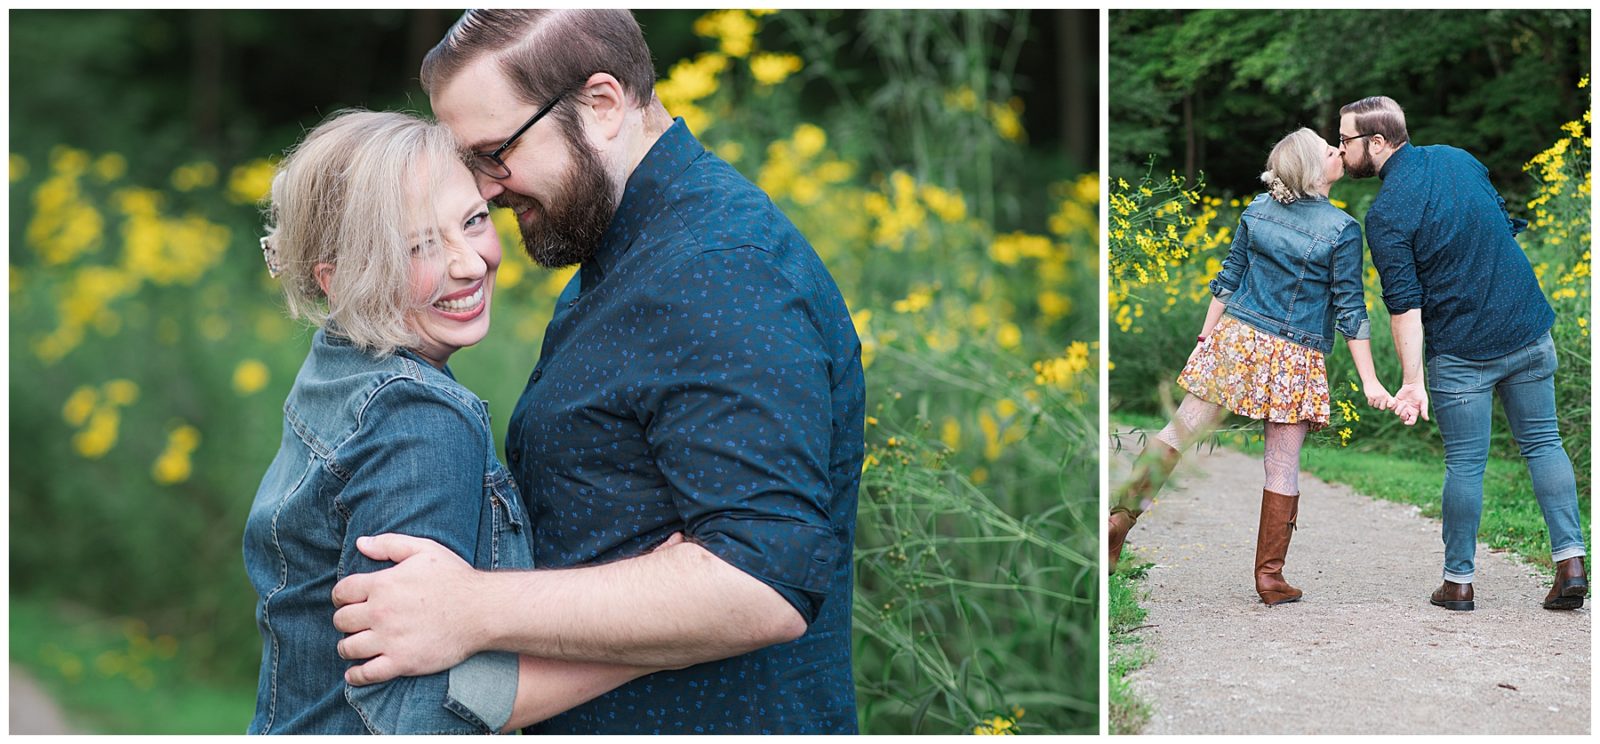 An August Ohio Engagement Session, fun and candid photos, engagement session outfit ideas, blue button down, jean jacket, outfit ideas, silly moments, wildflower field, metropark engagement session, golden hour